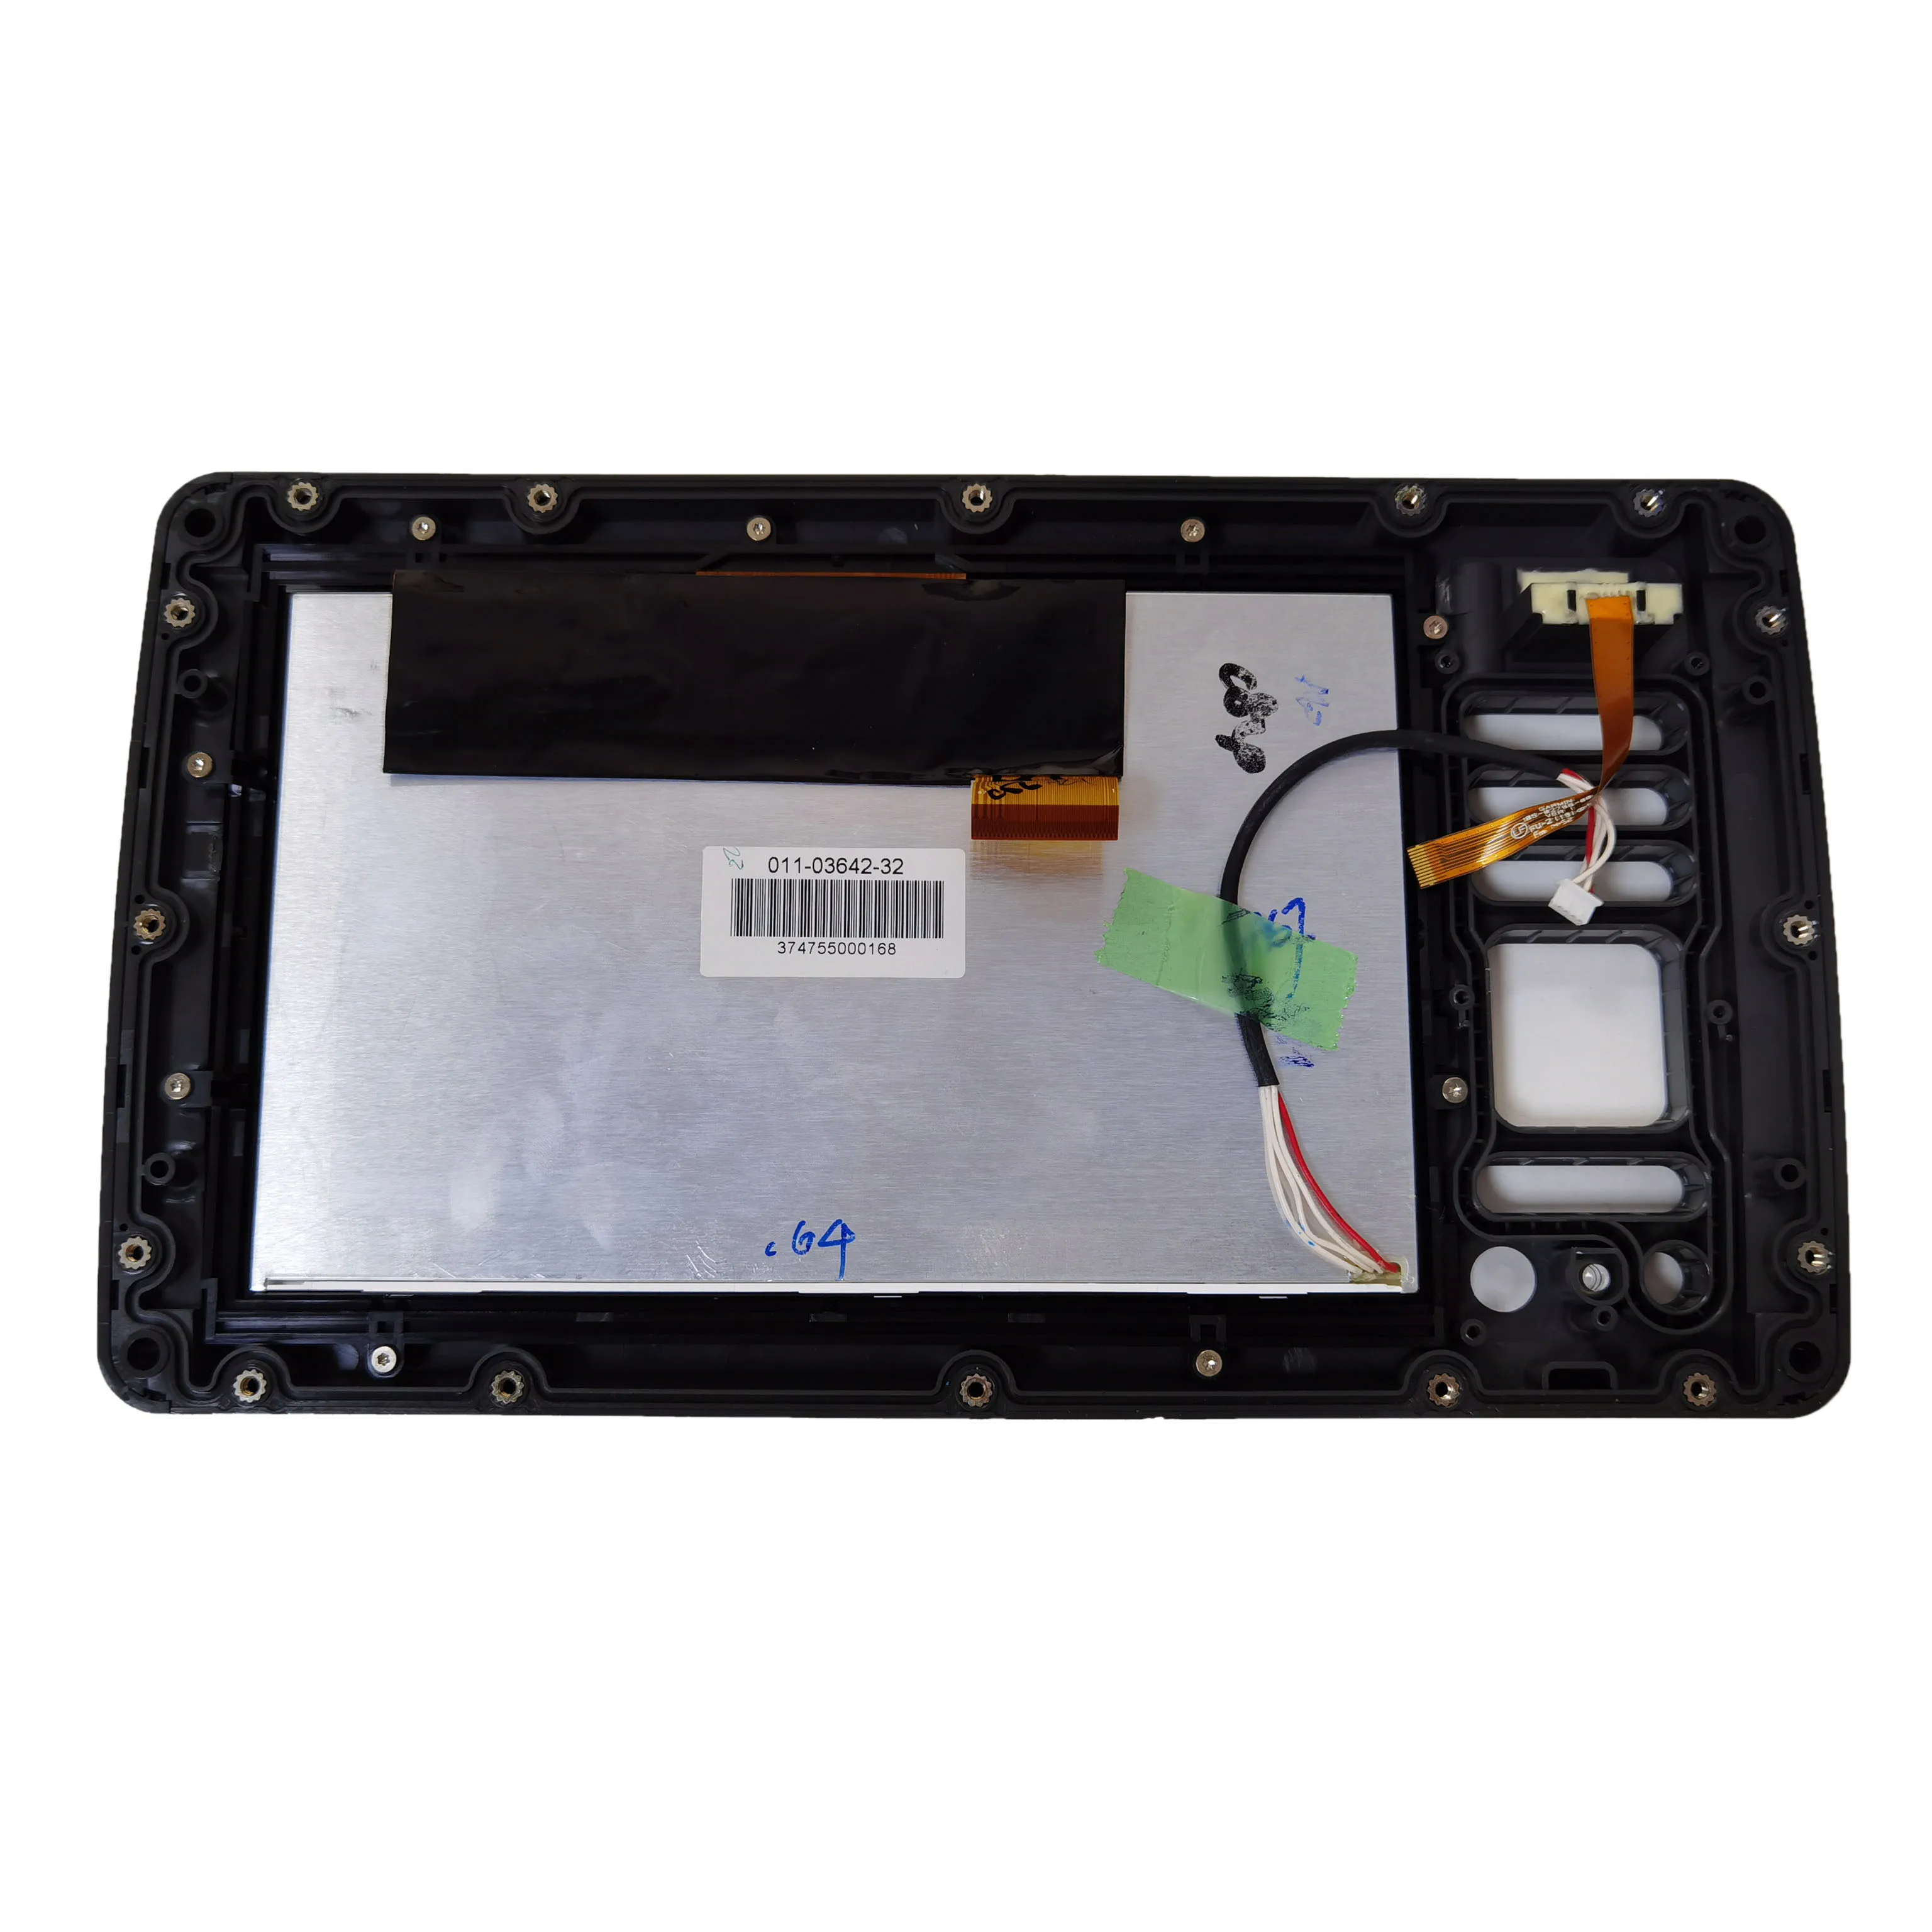 

7" inch Garmin chartplotter LCD display with frame for Garmin echoMAP 74sv LCD screen replacement and repair